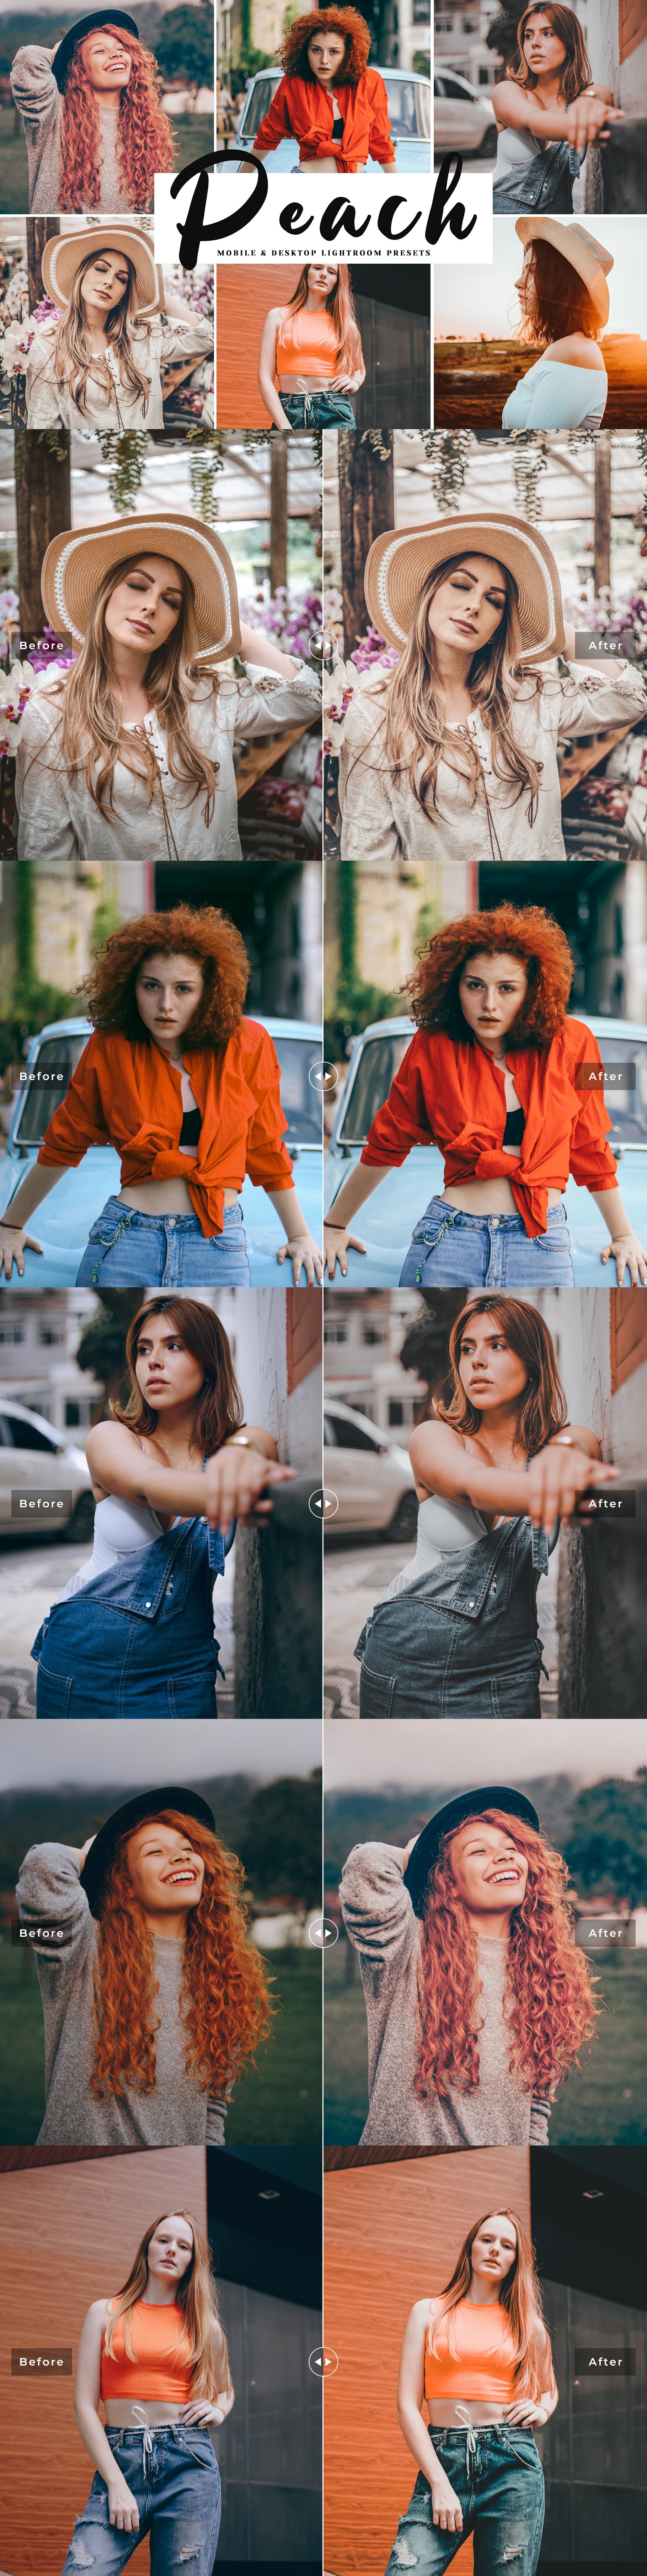 Peach Lightroom Presets Packcover image.